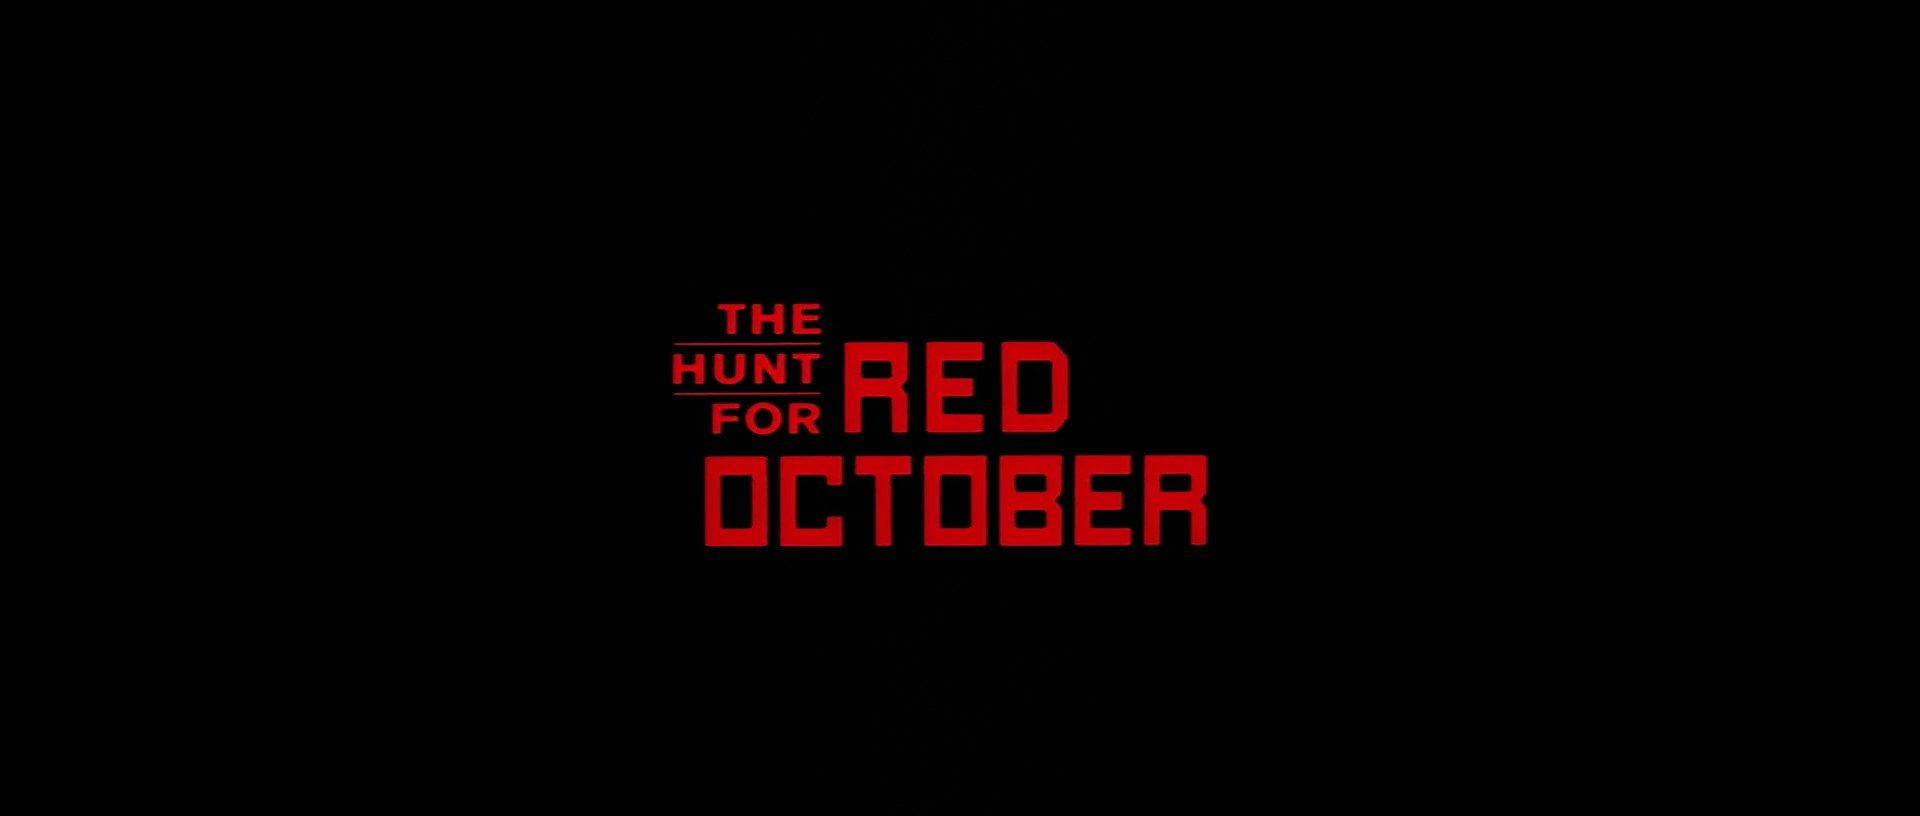 Red October Logo - The Hunt for Red October. Film and Television